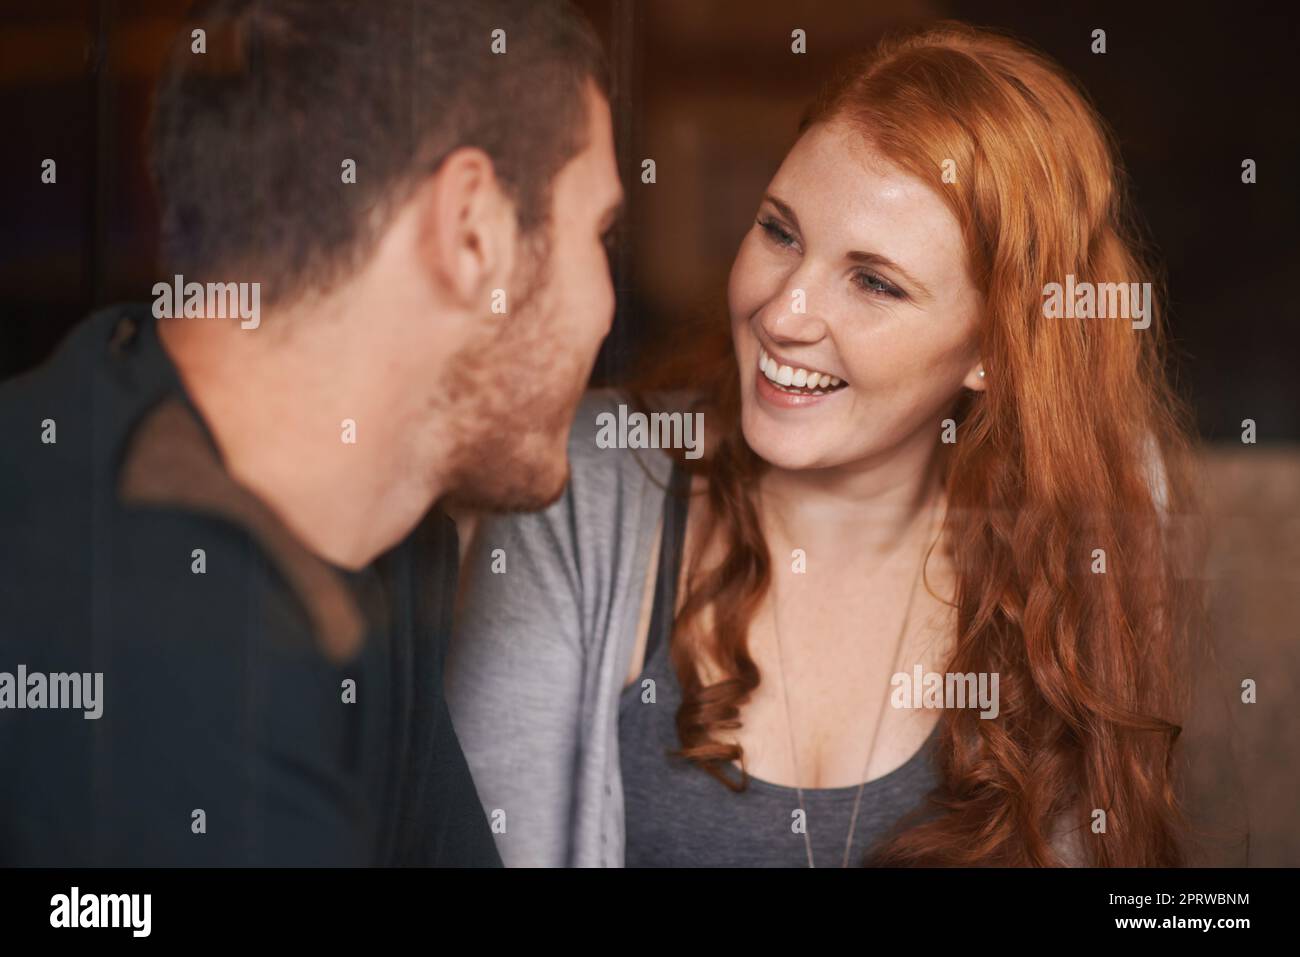 Theres nothing better than dating your best friend. a young affectionate couple on a date. Stock Photo